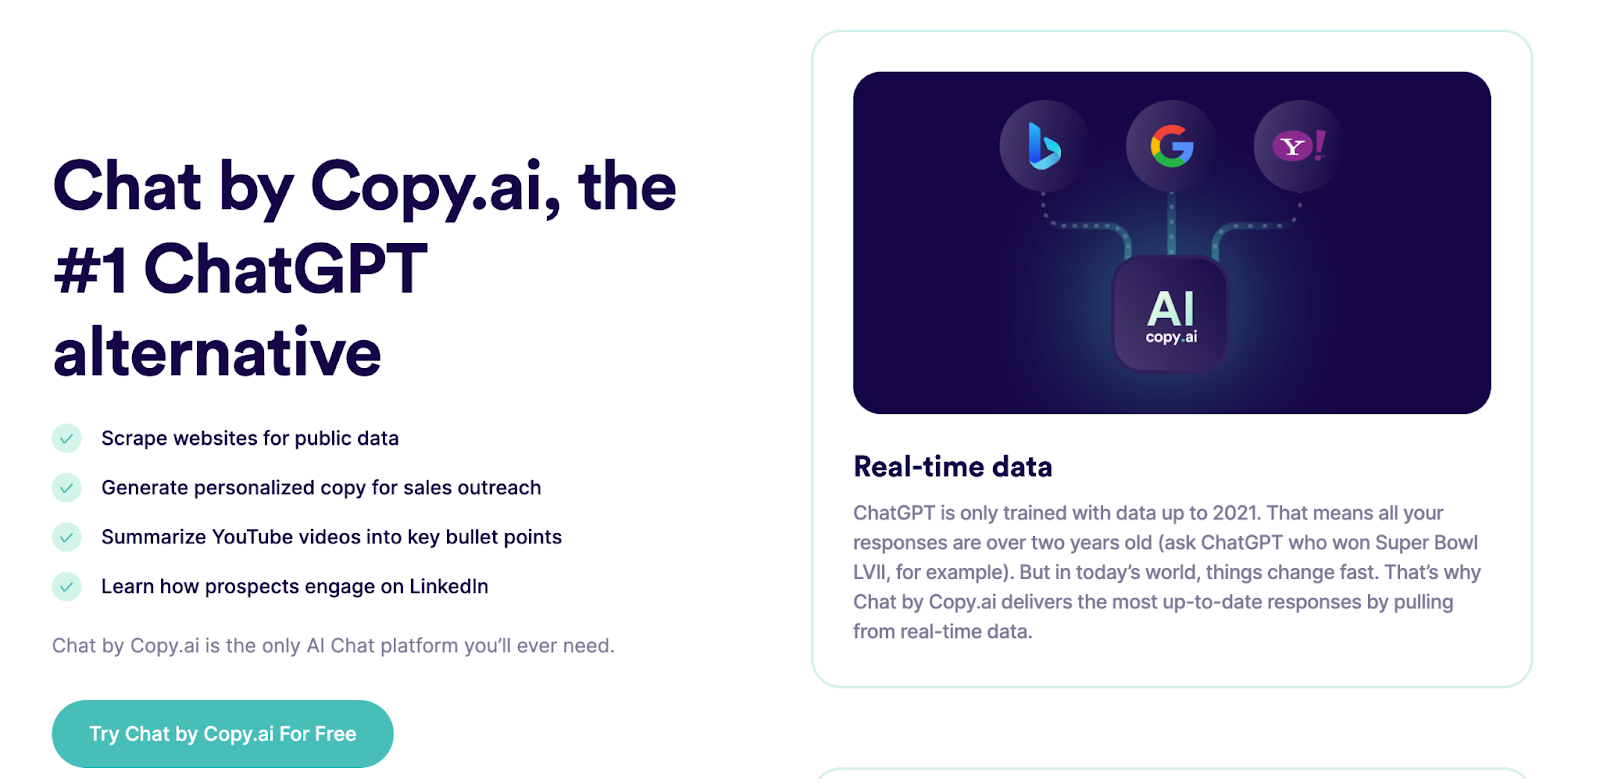 Chat by Copy.ai, the #1 ChatGPT alternative